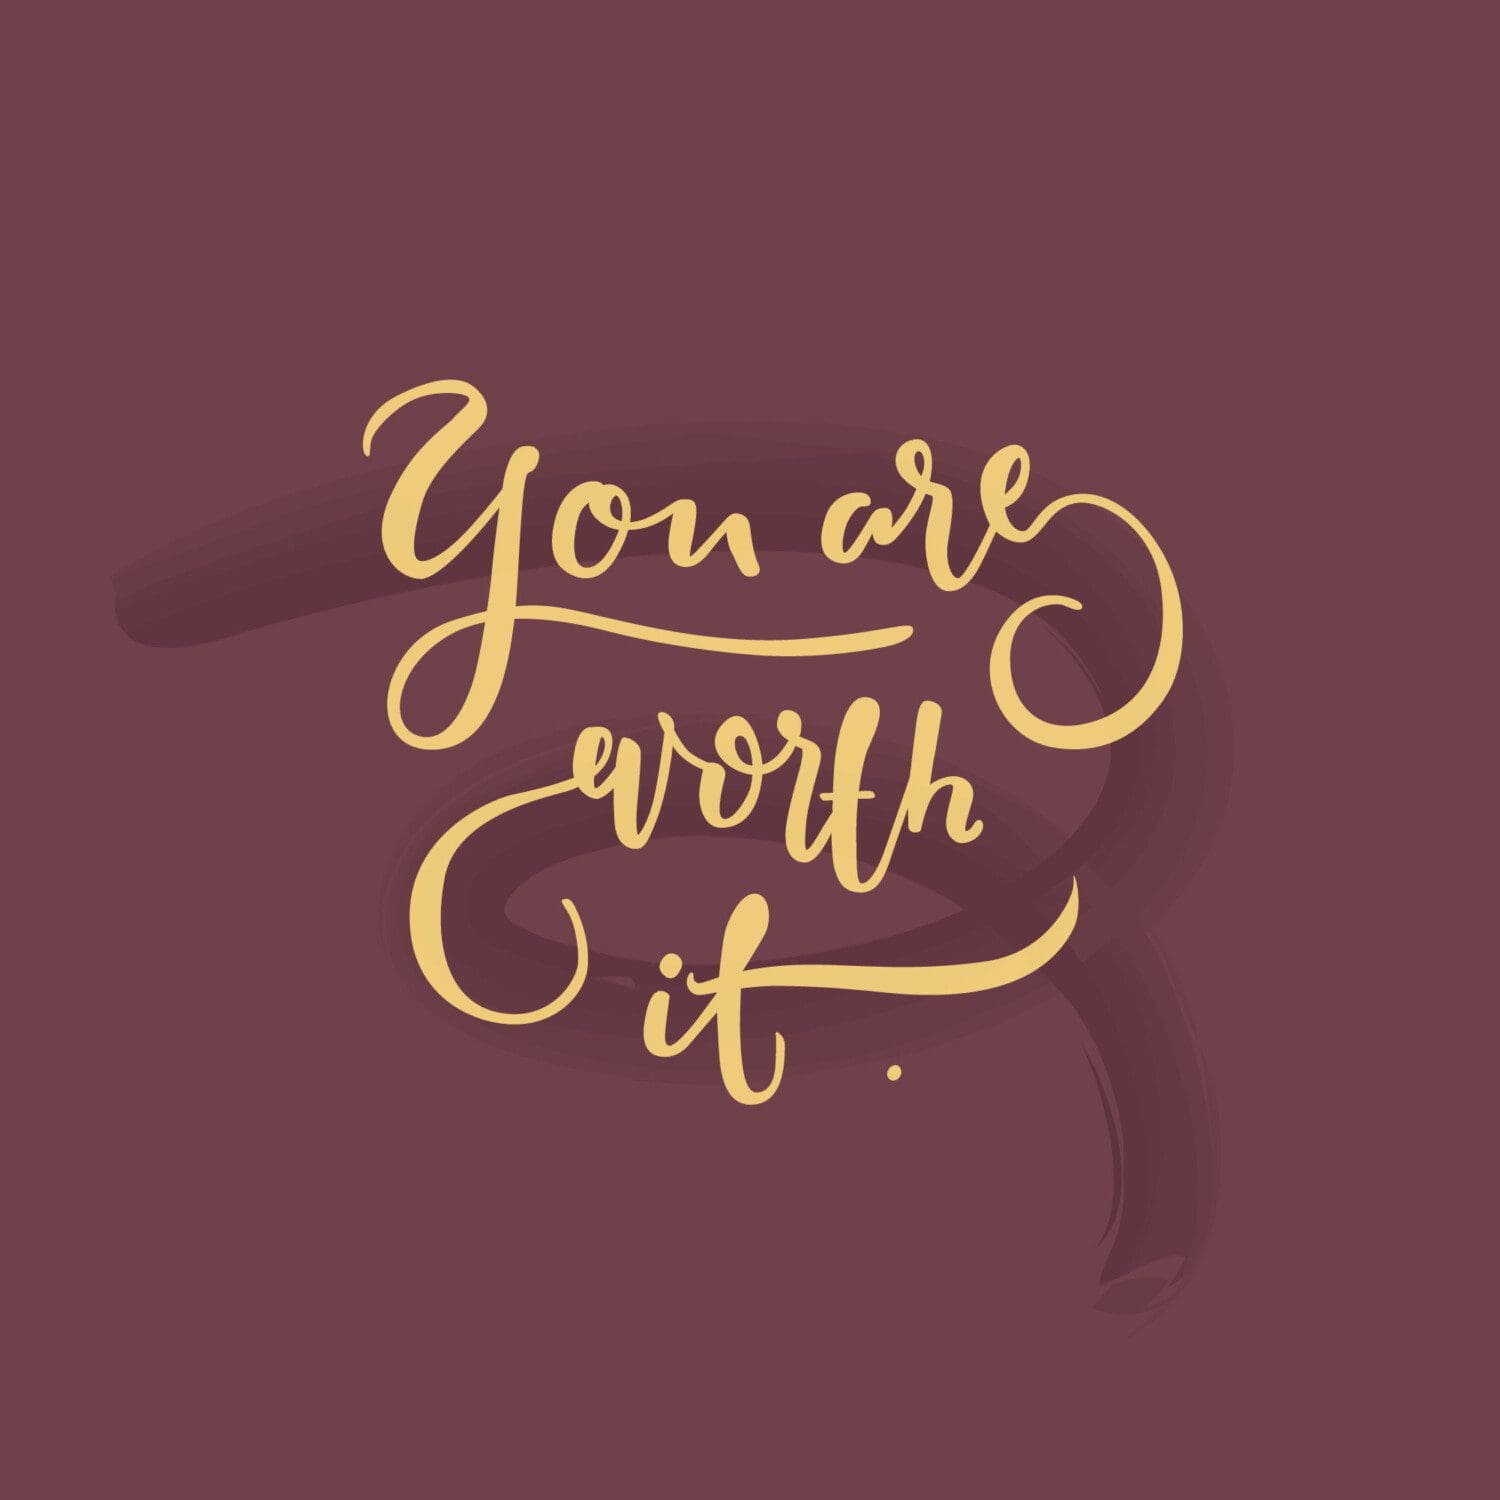 You are worth it